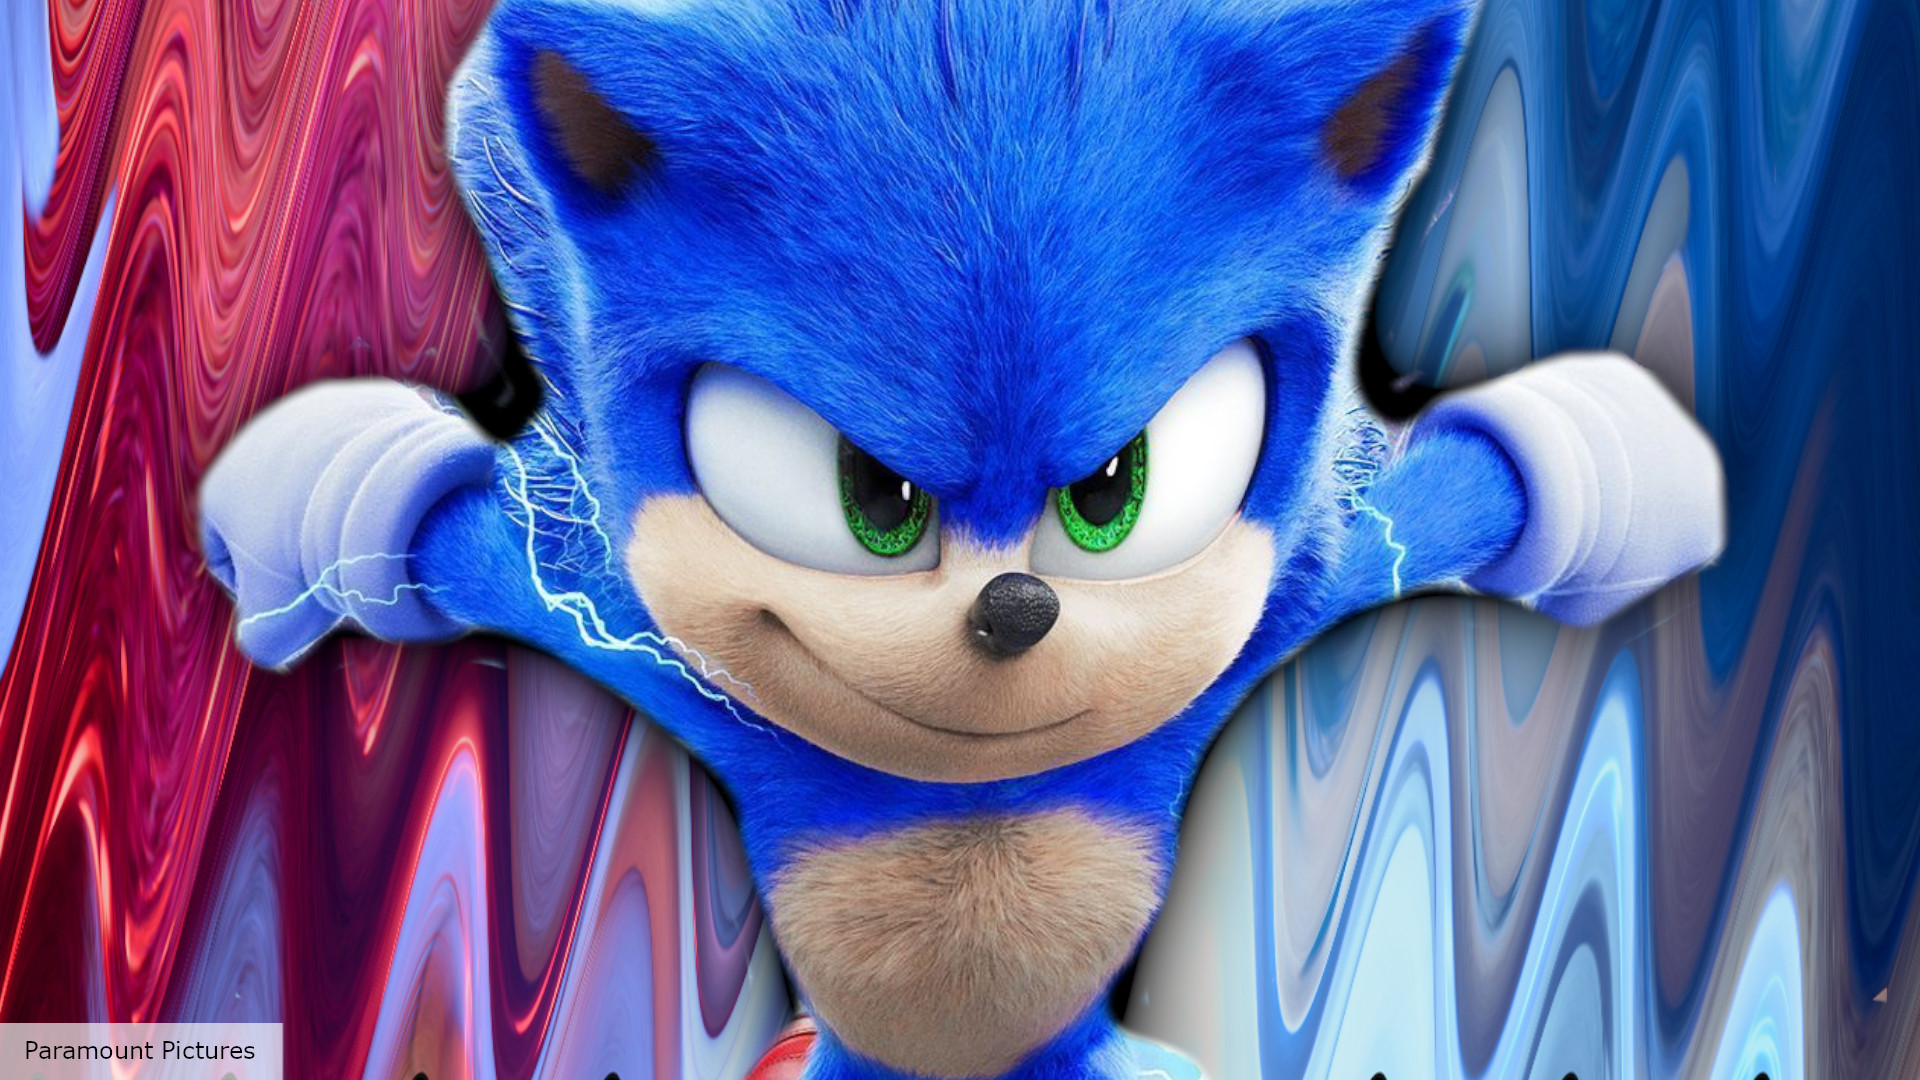 Sonic The Hedgehog 3 Release Date, Trailer – Is It Cancelled